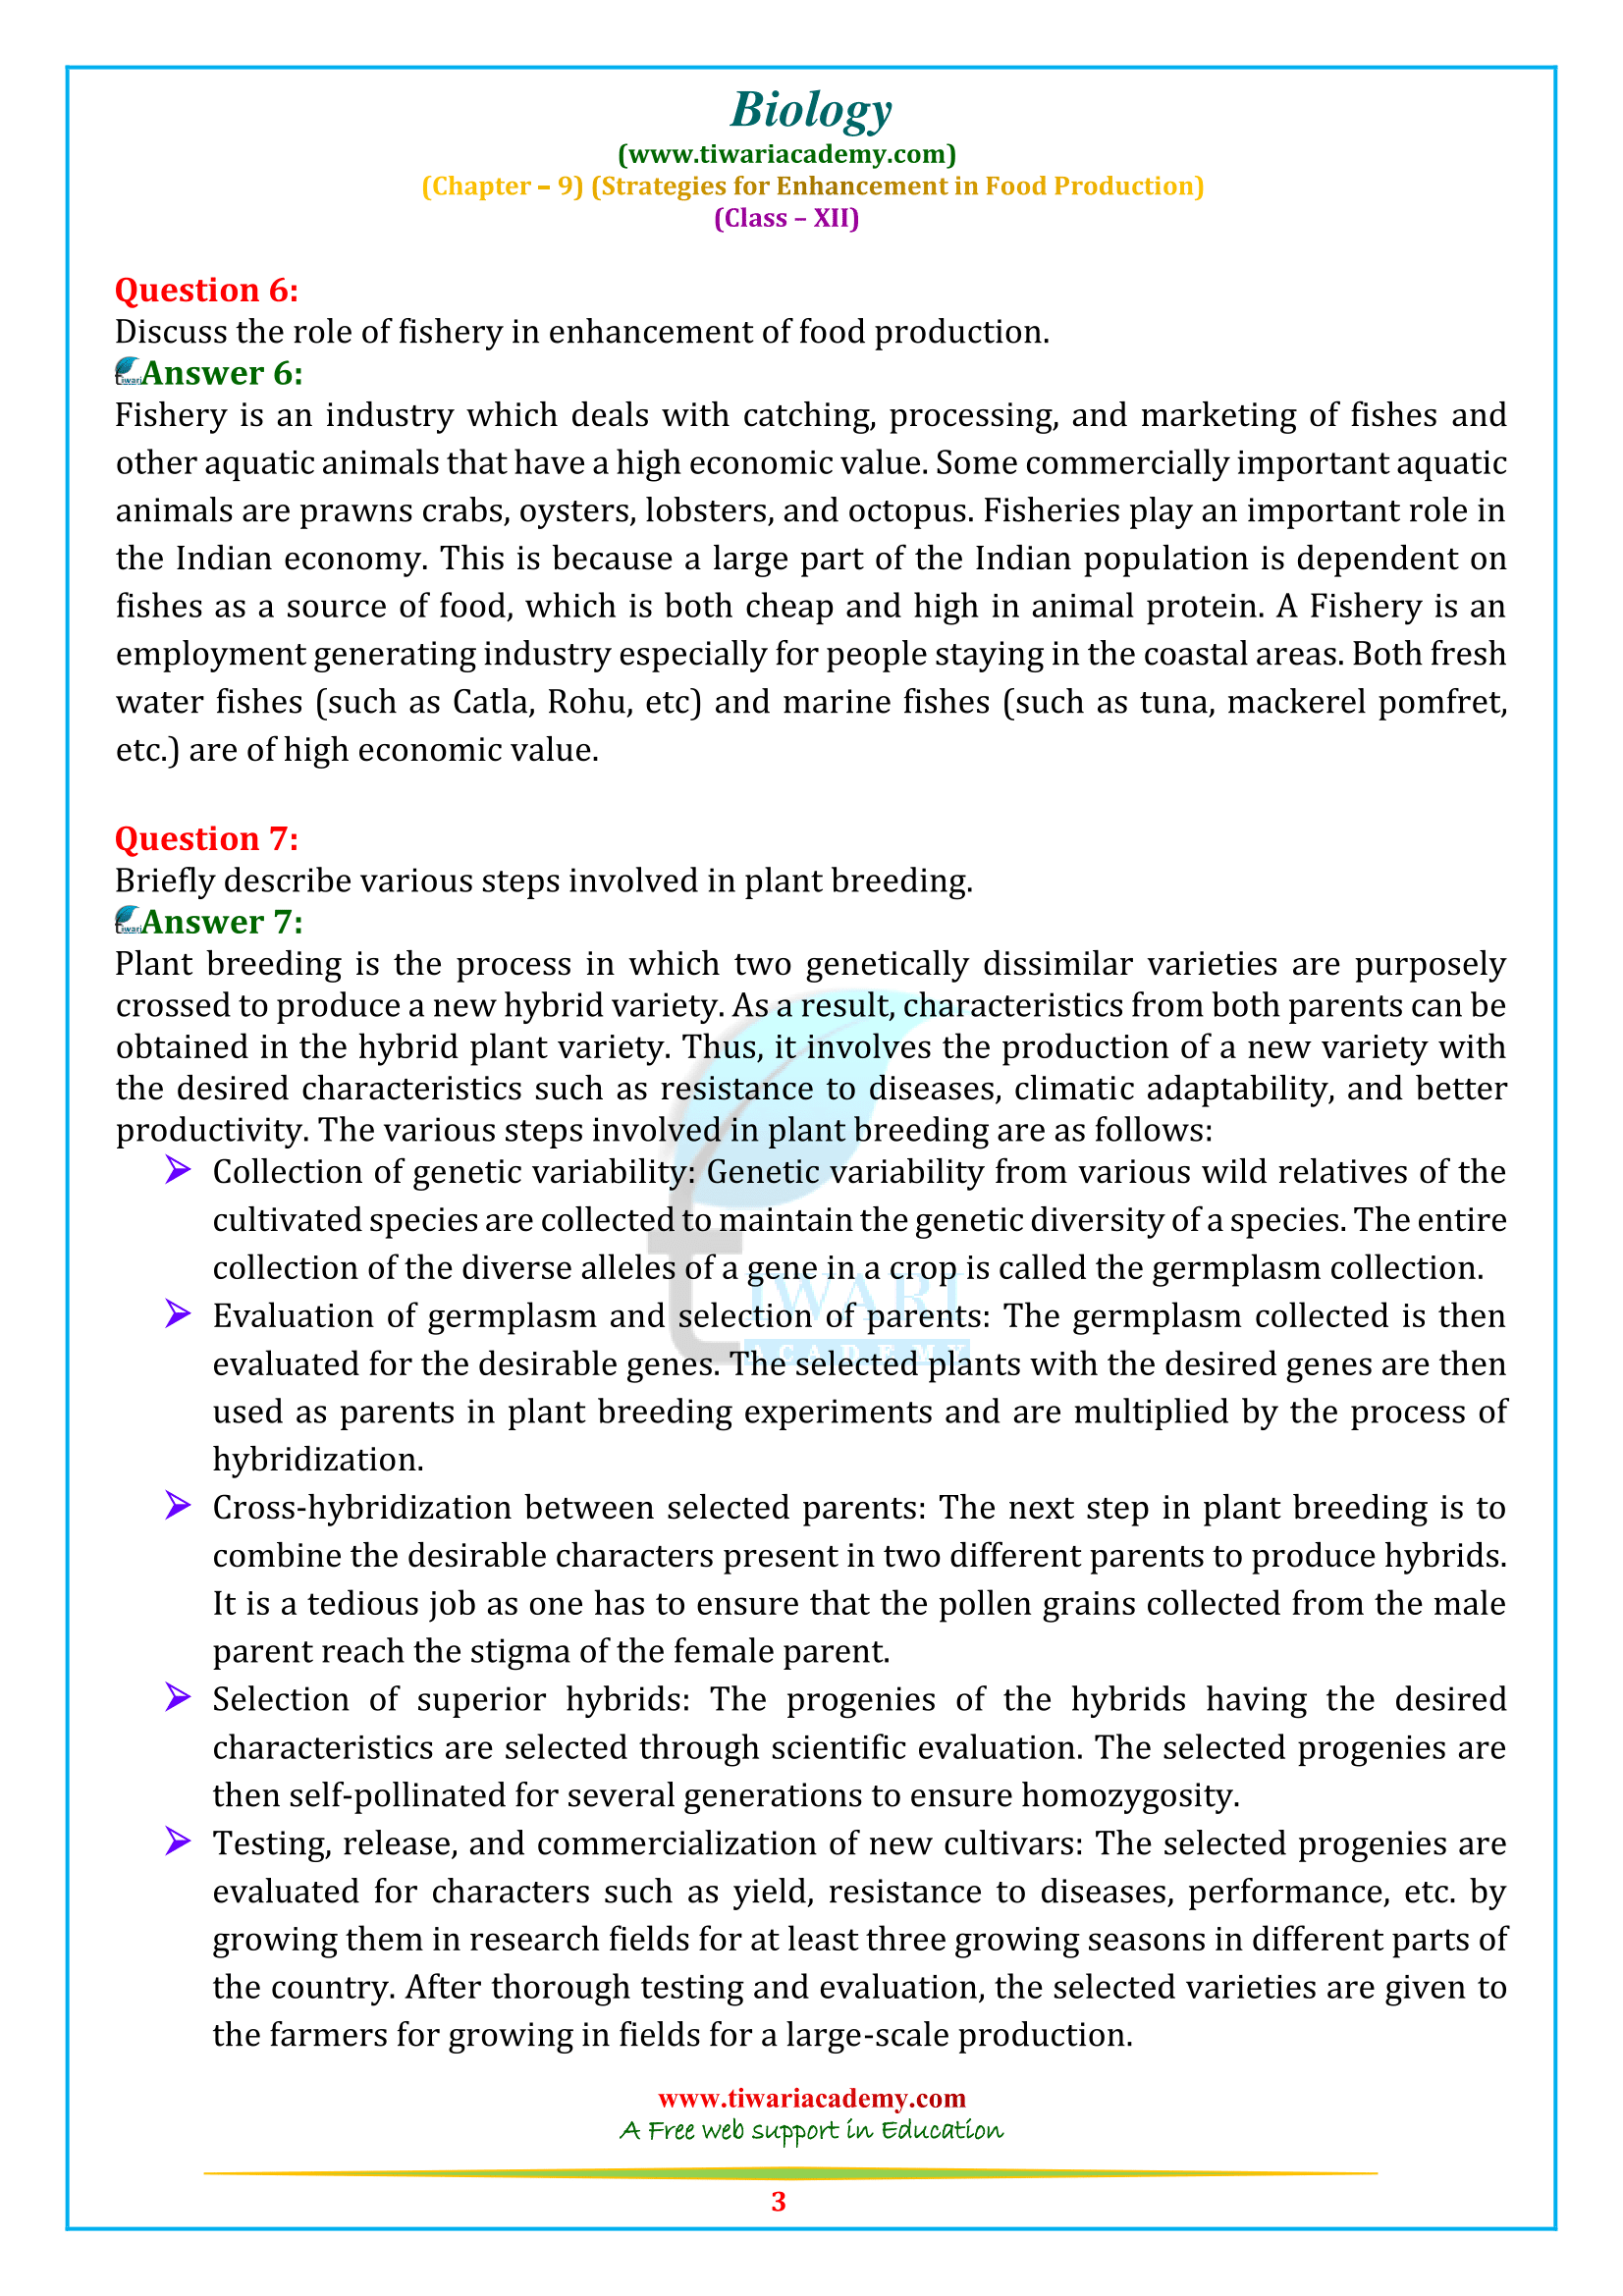 NCERT Solutions for Class 12 Biology Chapter 9 in PDF form